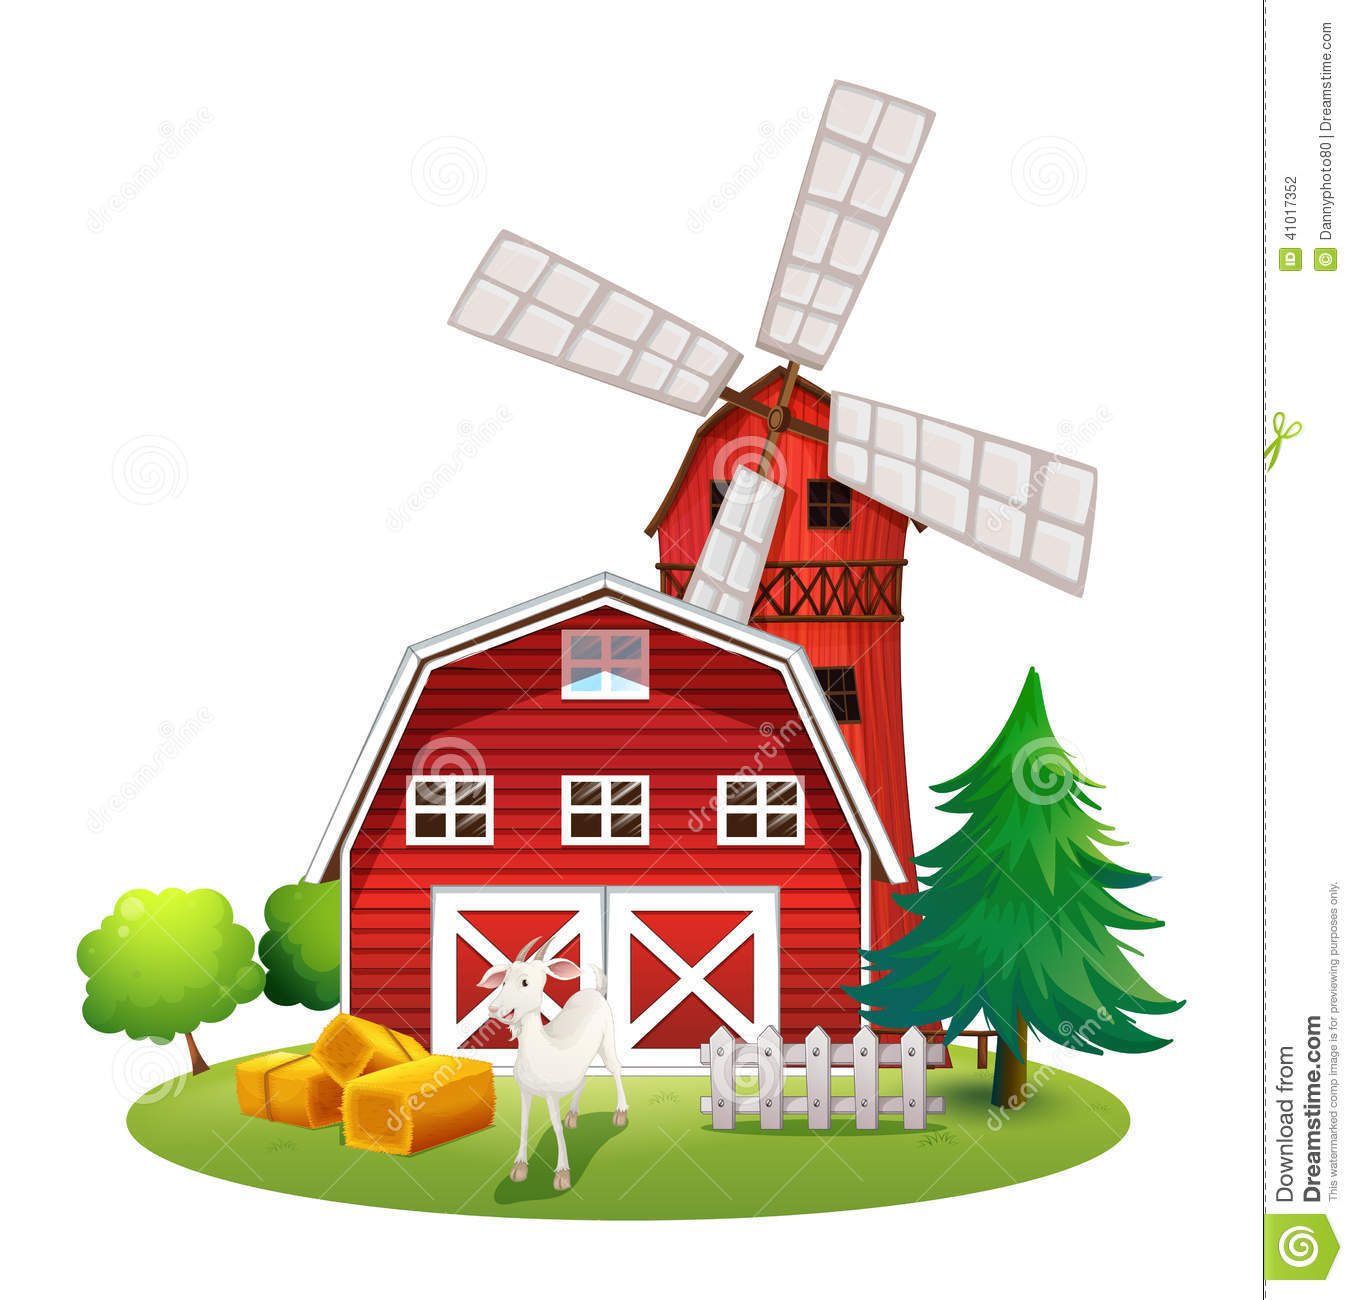 Farm With A Red House And A Windmill Stock Vector   Image  41017352